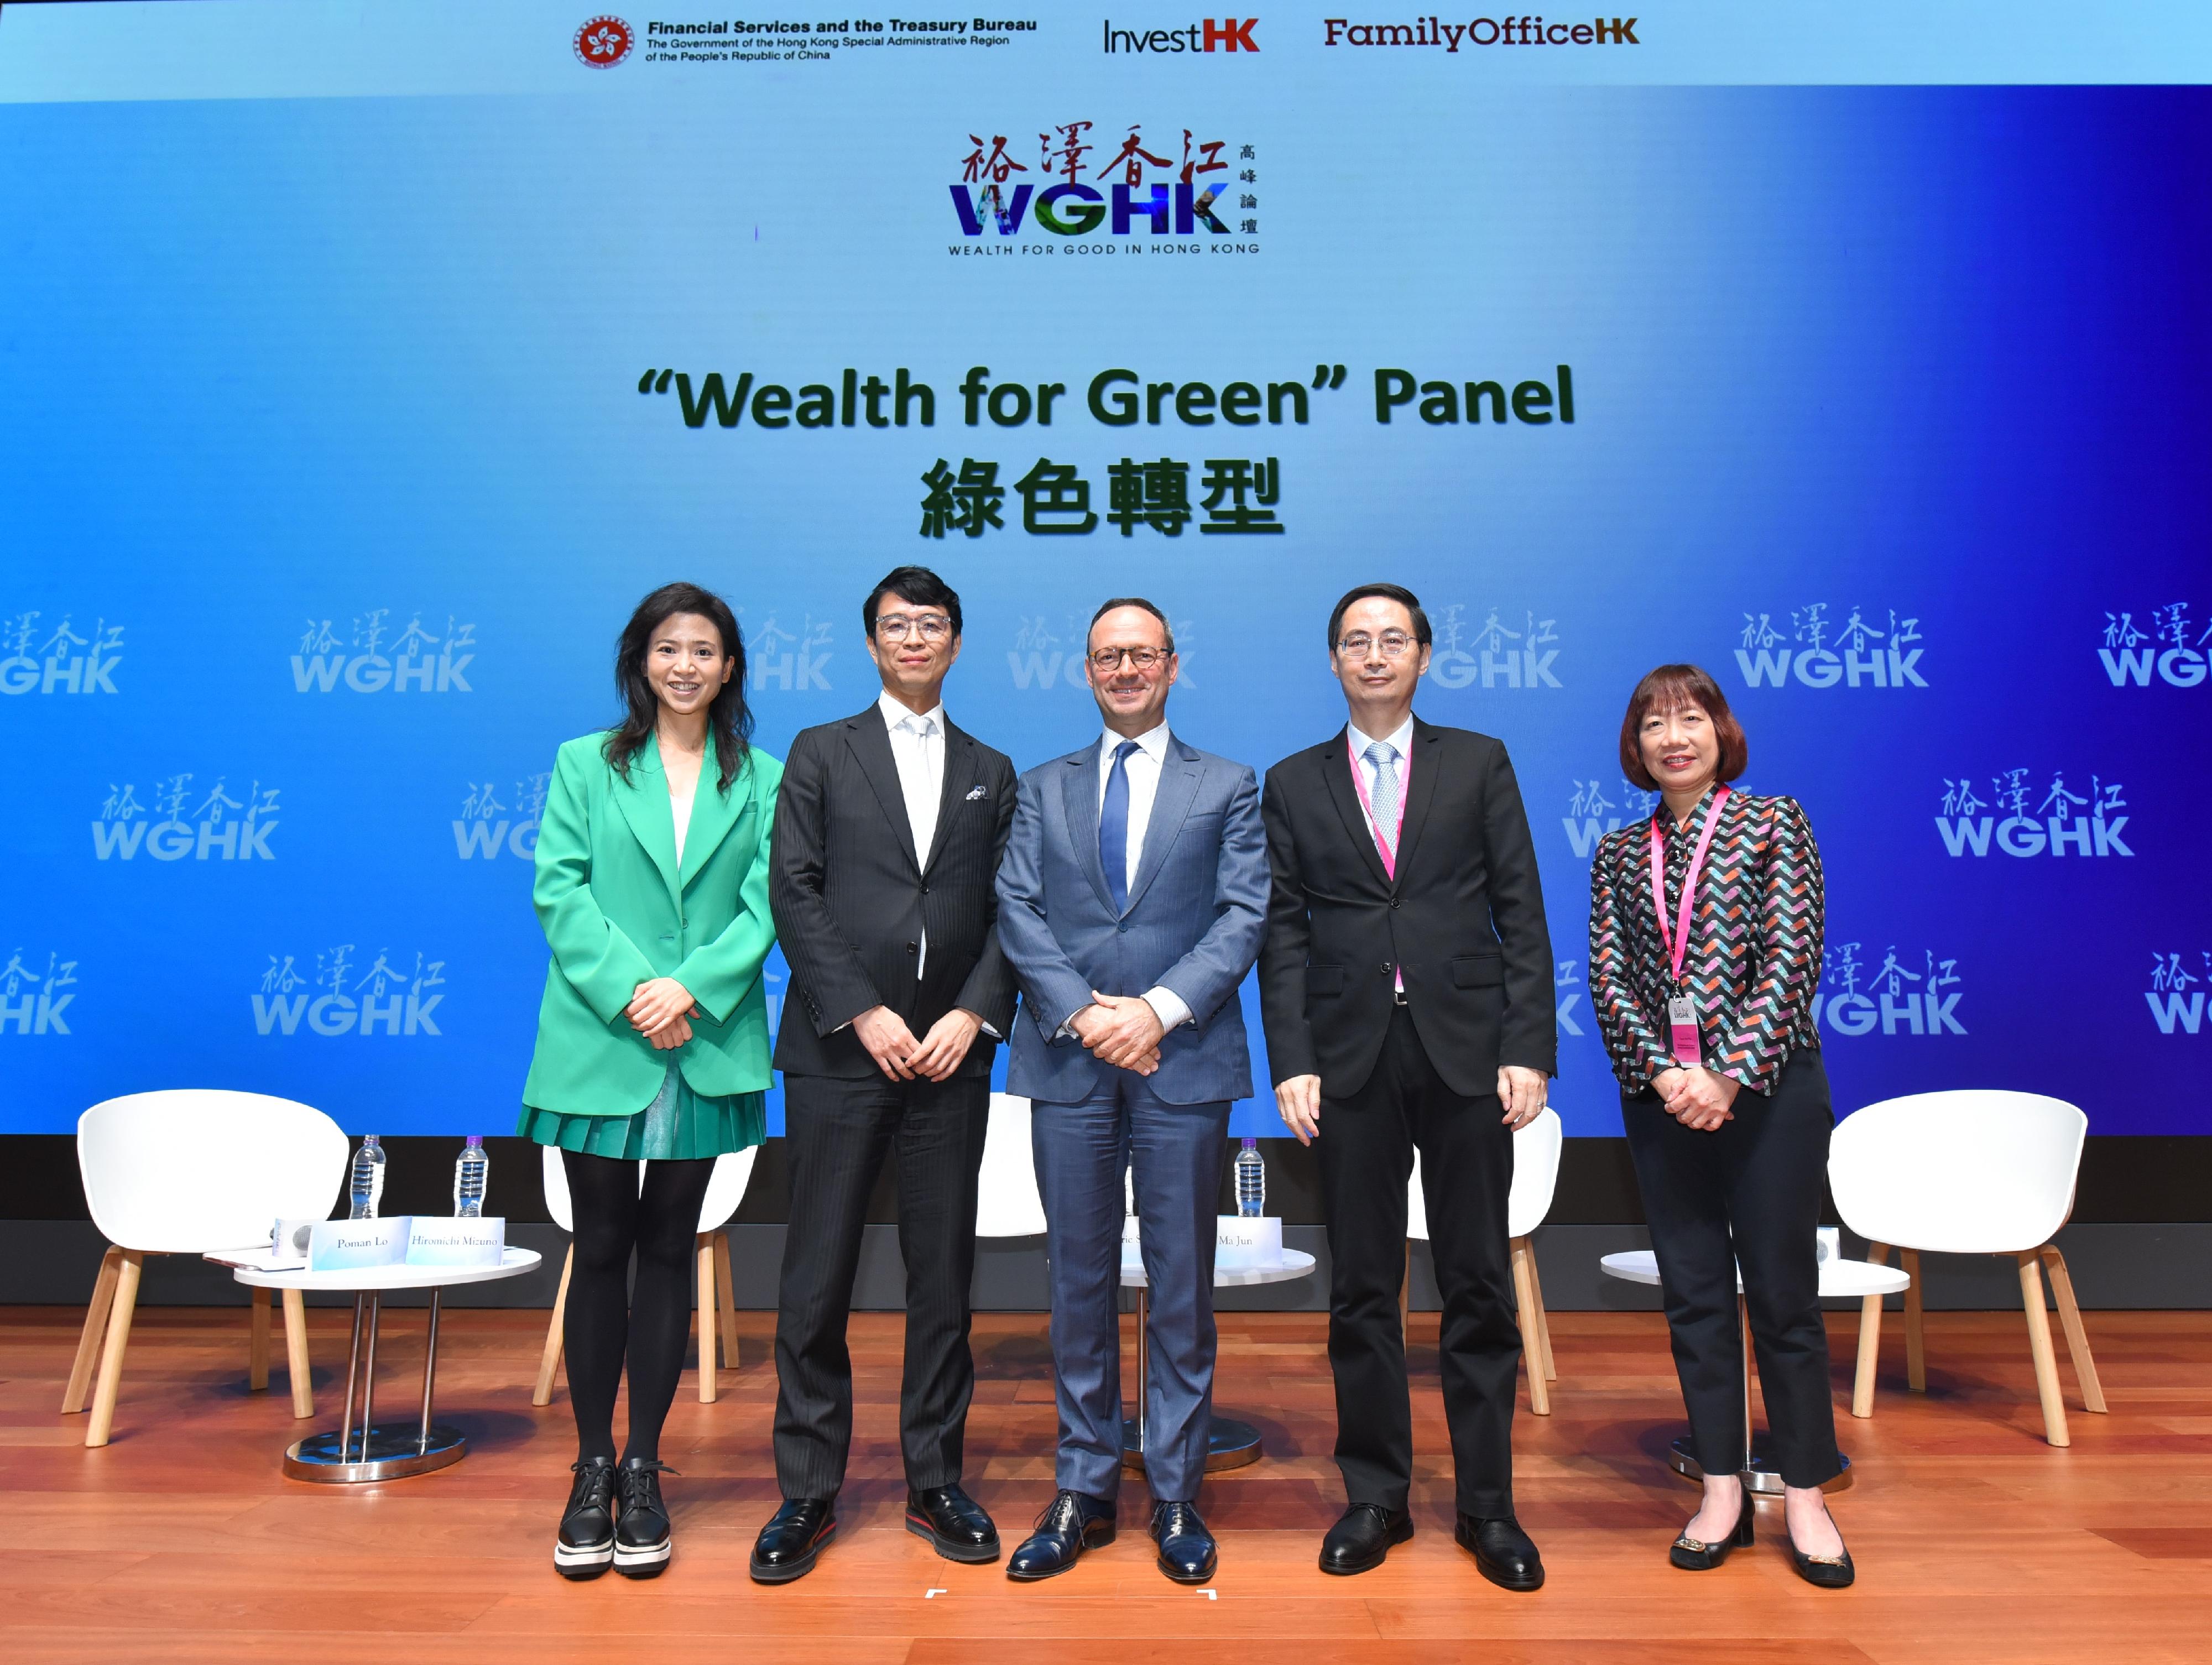 The Wealth for Good in Hong Kong Summit today (March 24) featured a "Wealth for Green" panel discussion moderated by the Founder of Institute of Sustainability and Technology, Founder and Managing Partner of AlphaTrio Capital and Vice Chairman of Regal Hotels Group, Ms Poman Lo. The discussion explored the significant role that family offices can play in combating the effects of global warming. The speakers also took a look at Hong Kong's efforts in areas like green finance and driving the global transition to greener and more sustainable development. Panel speakers (from left to right): Ms Lo; Tesla Board member, Ex CIO of GPIF and former United Nations Special Envoy for Innovative Finance and Sustainable Investments, Mr Hiromichi Mizuno; the Chairman of EQT Asia and Head of BPEA EQT, Mr Jean Salata; the Chairman and President of Hong Kong Green Finance Association, Mr Ma Jun; and Chief Investment Officer, Asia, HSBC Global Private Banking and Wealth, Ms Fan Cheuk-wan.